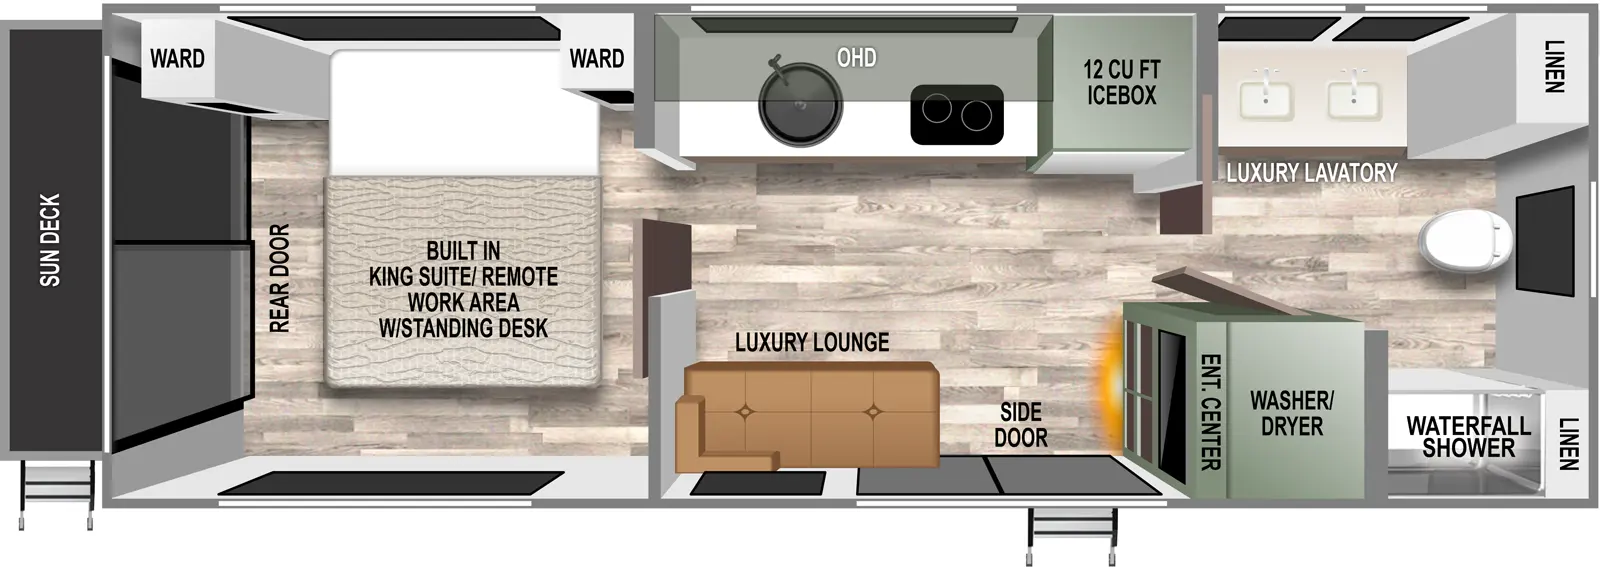 The RVS1 has zero slideouts and two entries. Interior layout front to back: full bathroom with linen closets, luxury lavatory with two sinks, waterfall shower, and washer/dryer; off-door side icebox, kitchen counter with cooktop, sink, and overhead cabinets; door side entertainment center, side door entry, and luxury lounge; rear bedroom with off-door side side-facing built-in king suite/remote work area with standing desk, wardrobes on each side, and rear door that leads to a sun deck with steps.